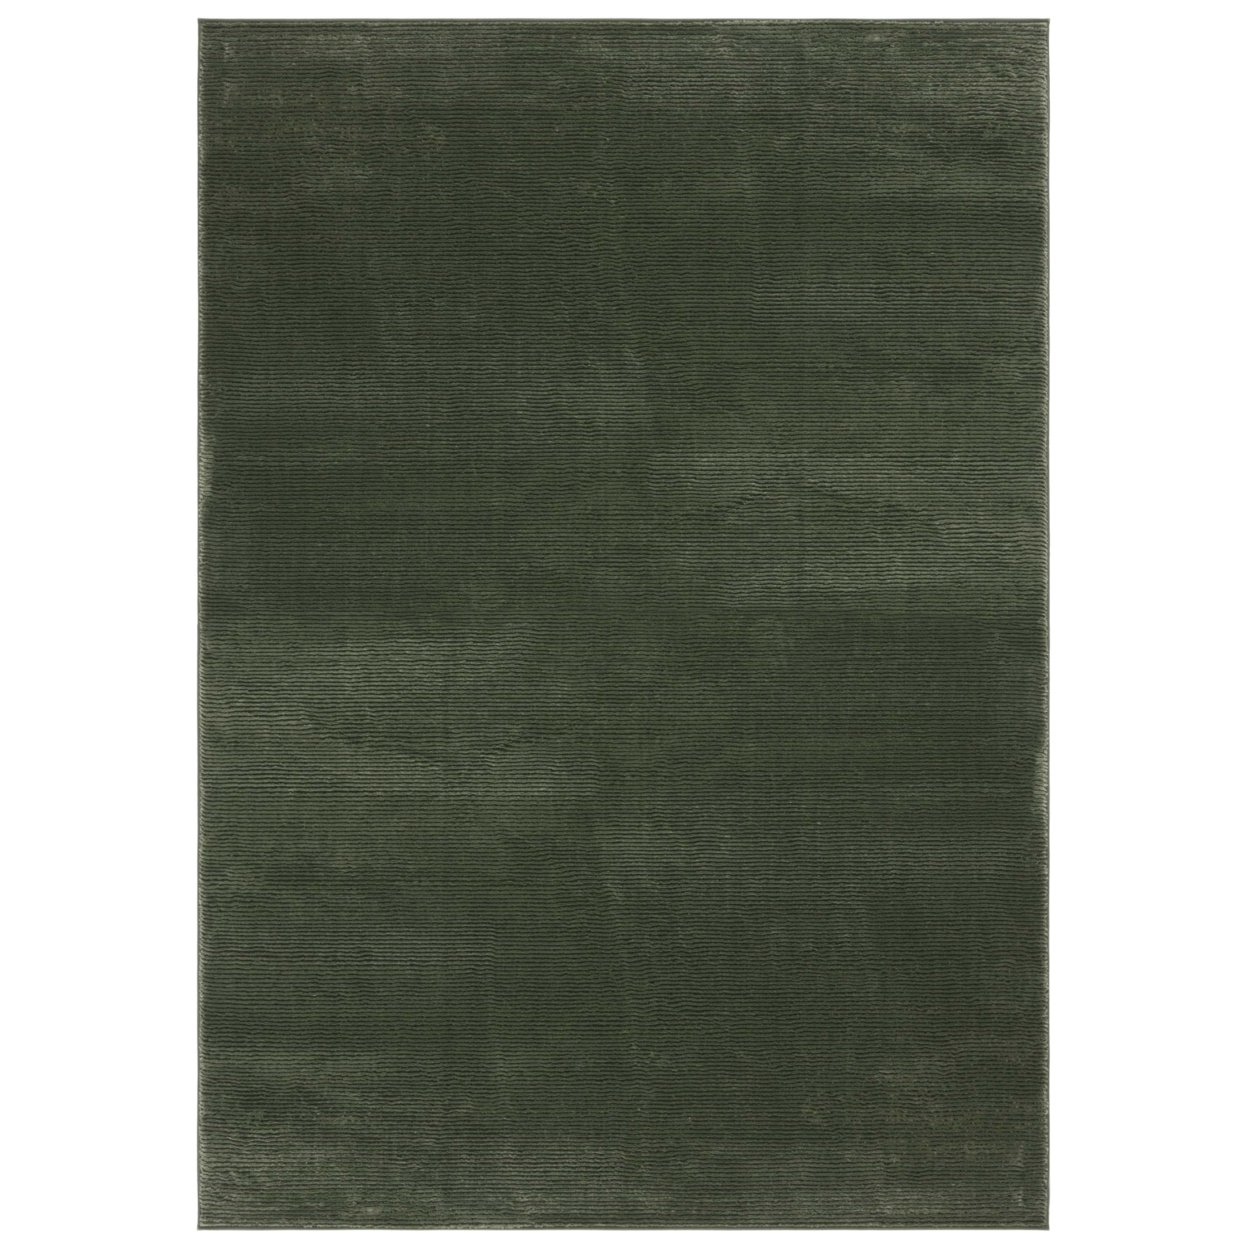 SAFAVIEH REV102Y Revive Green - Taupe, 8' X 10' Rectangle